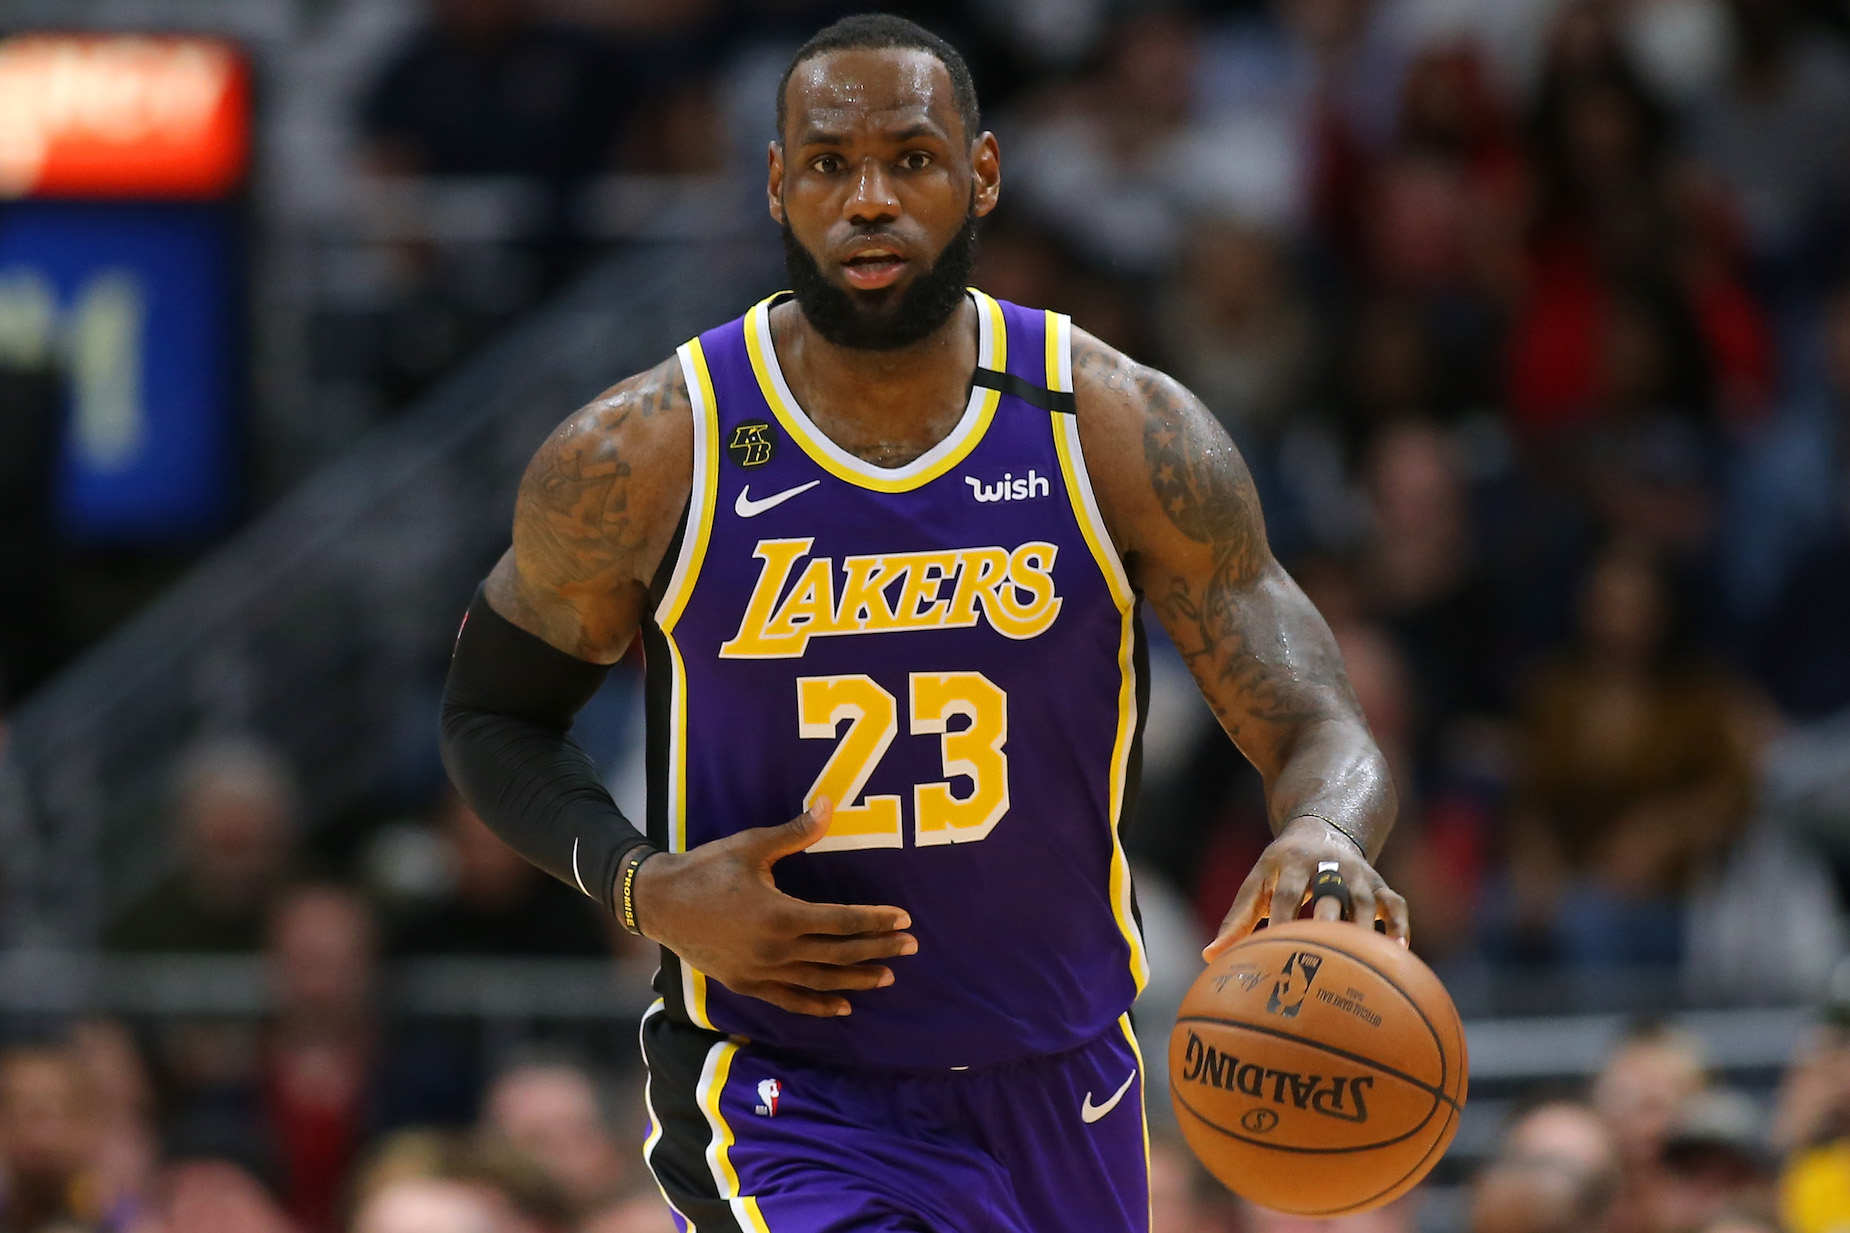 LeBron James could become the NBA's all-time playoff wins leader during the 2020 postseason.